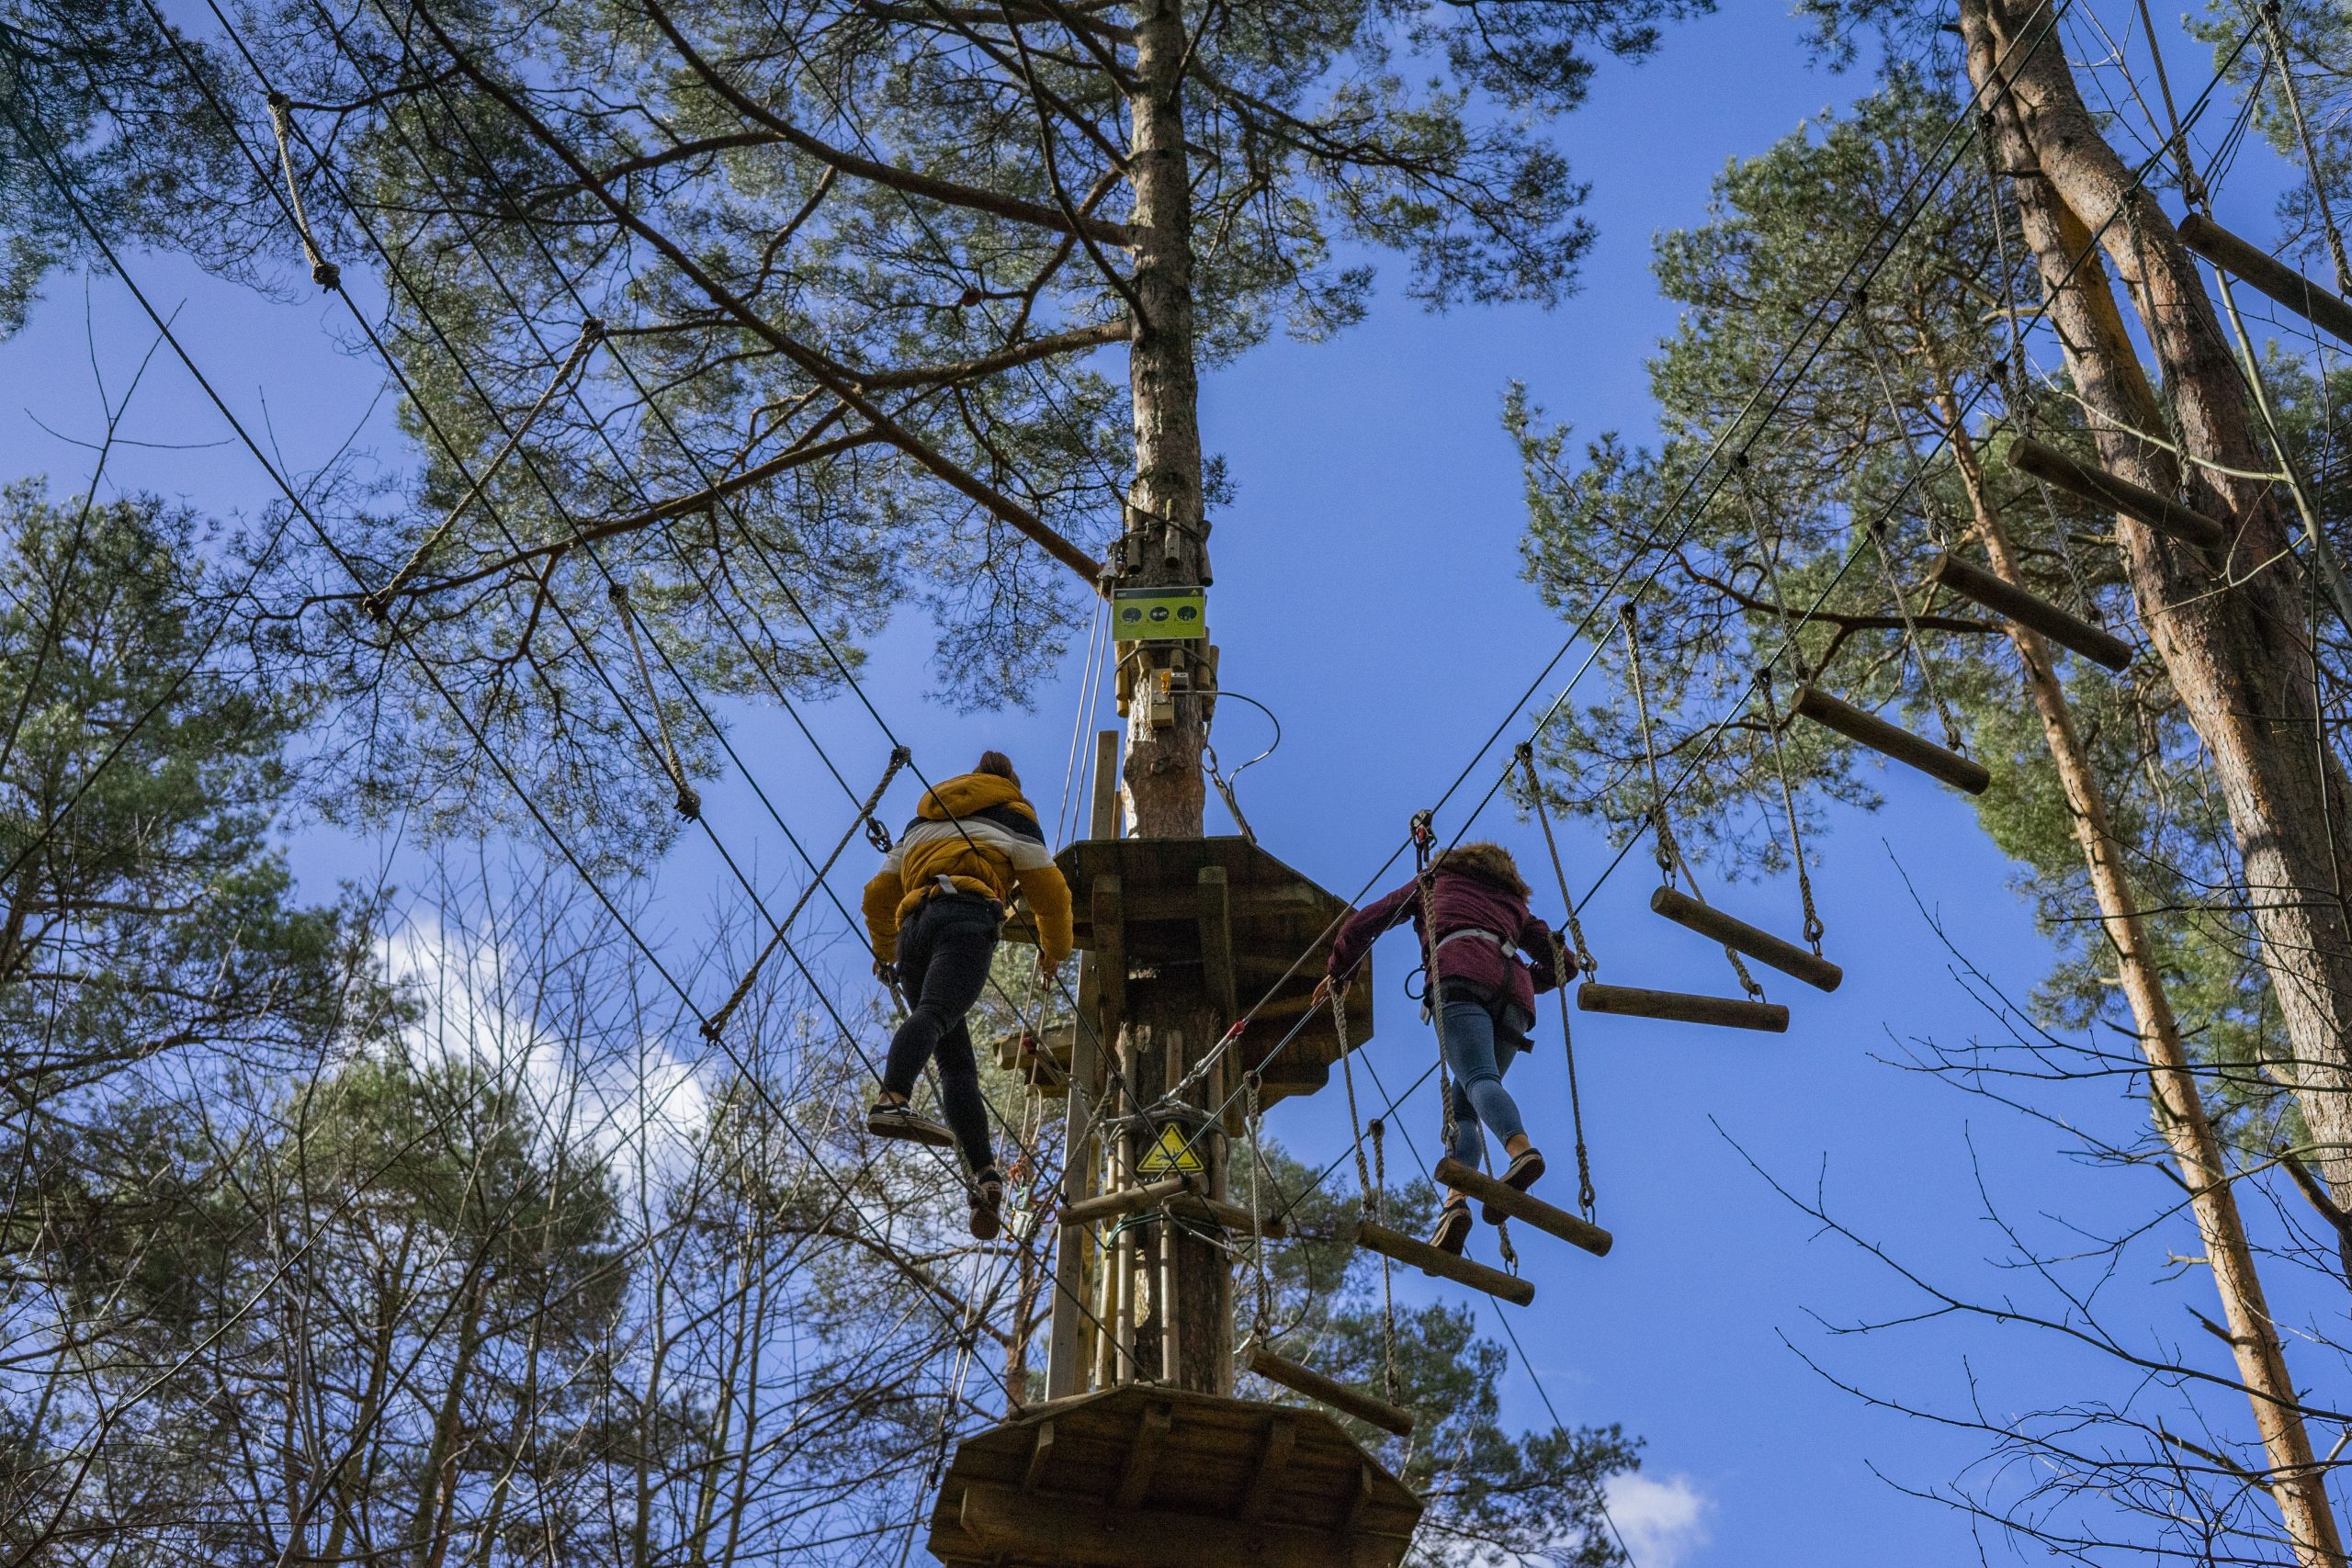 Go Ape in Bedgebury Forest